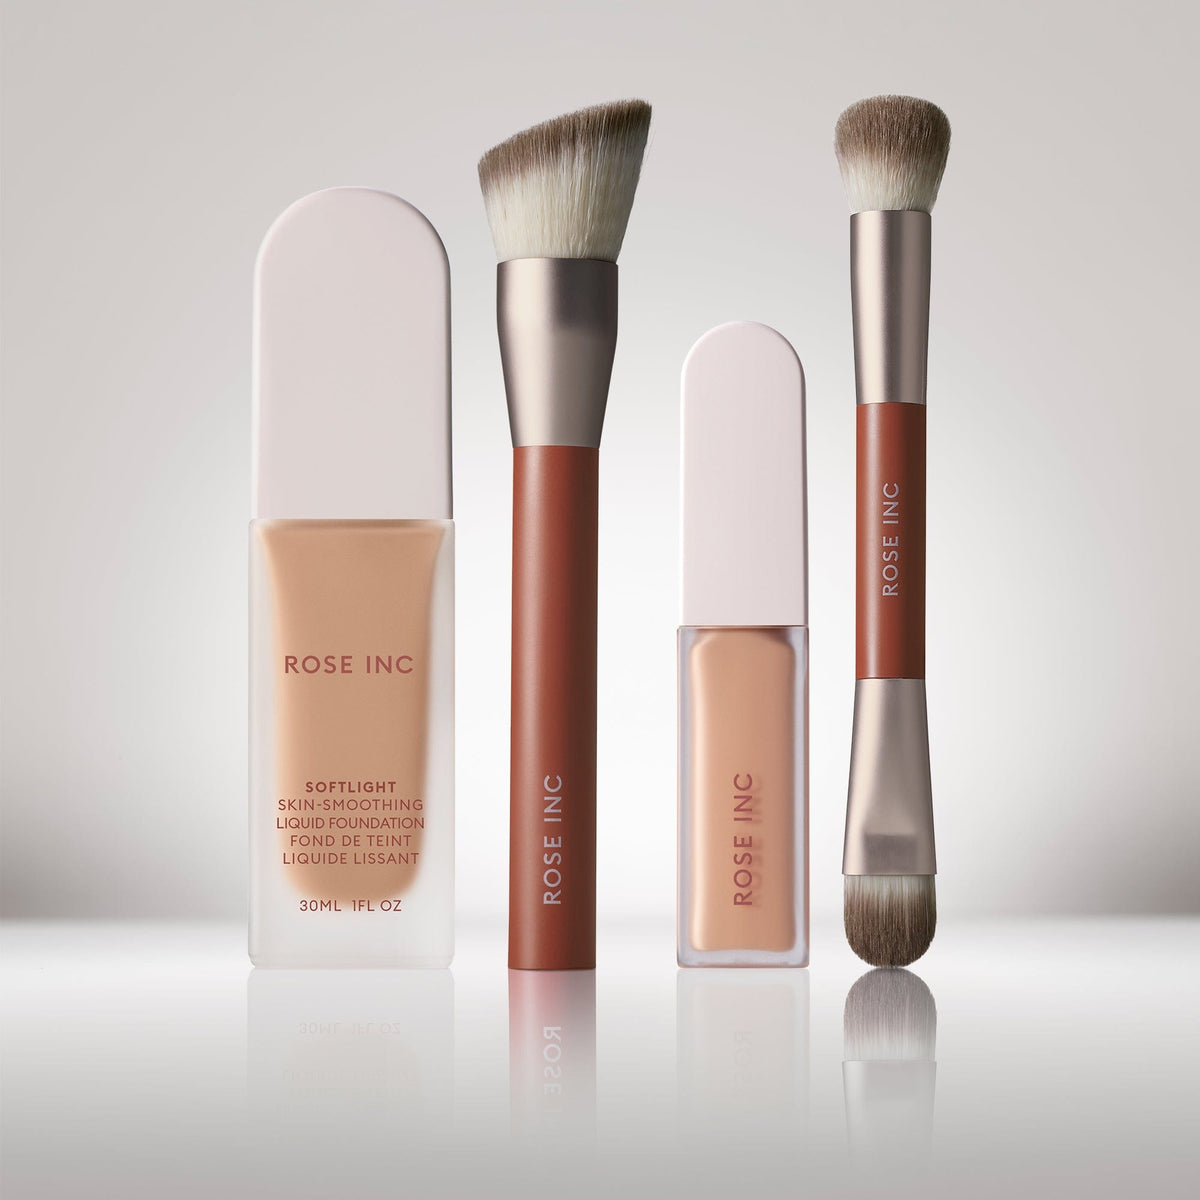 Complexion formulas and custom brushes for a smooth, soft-focus complexion.